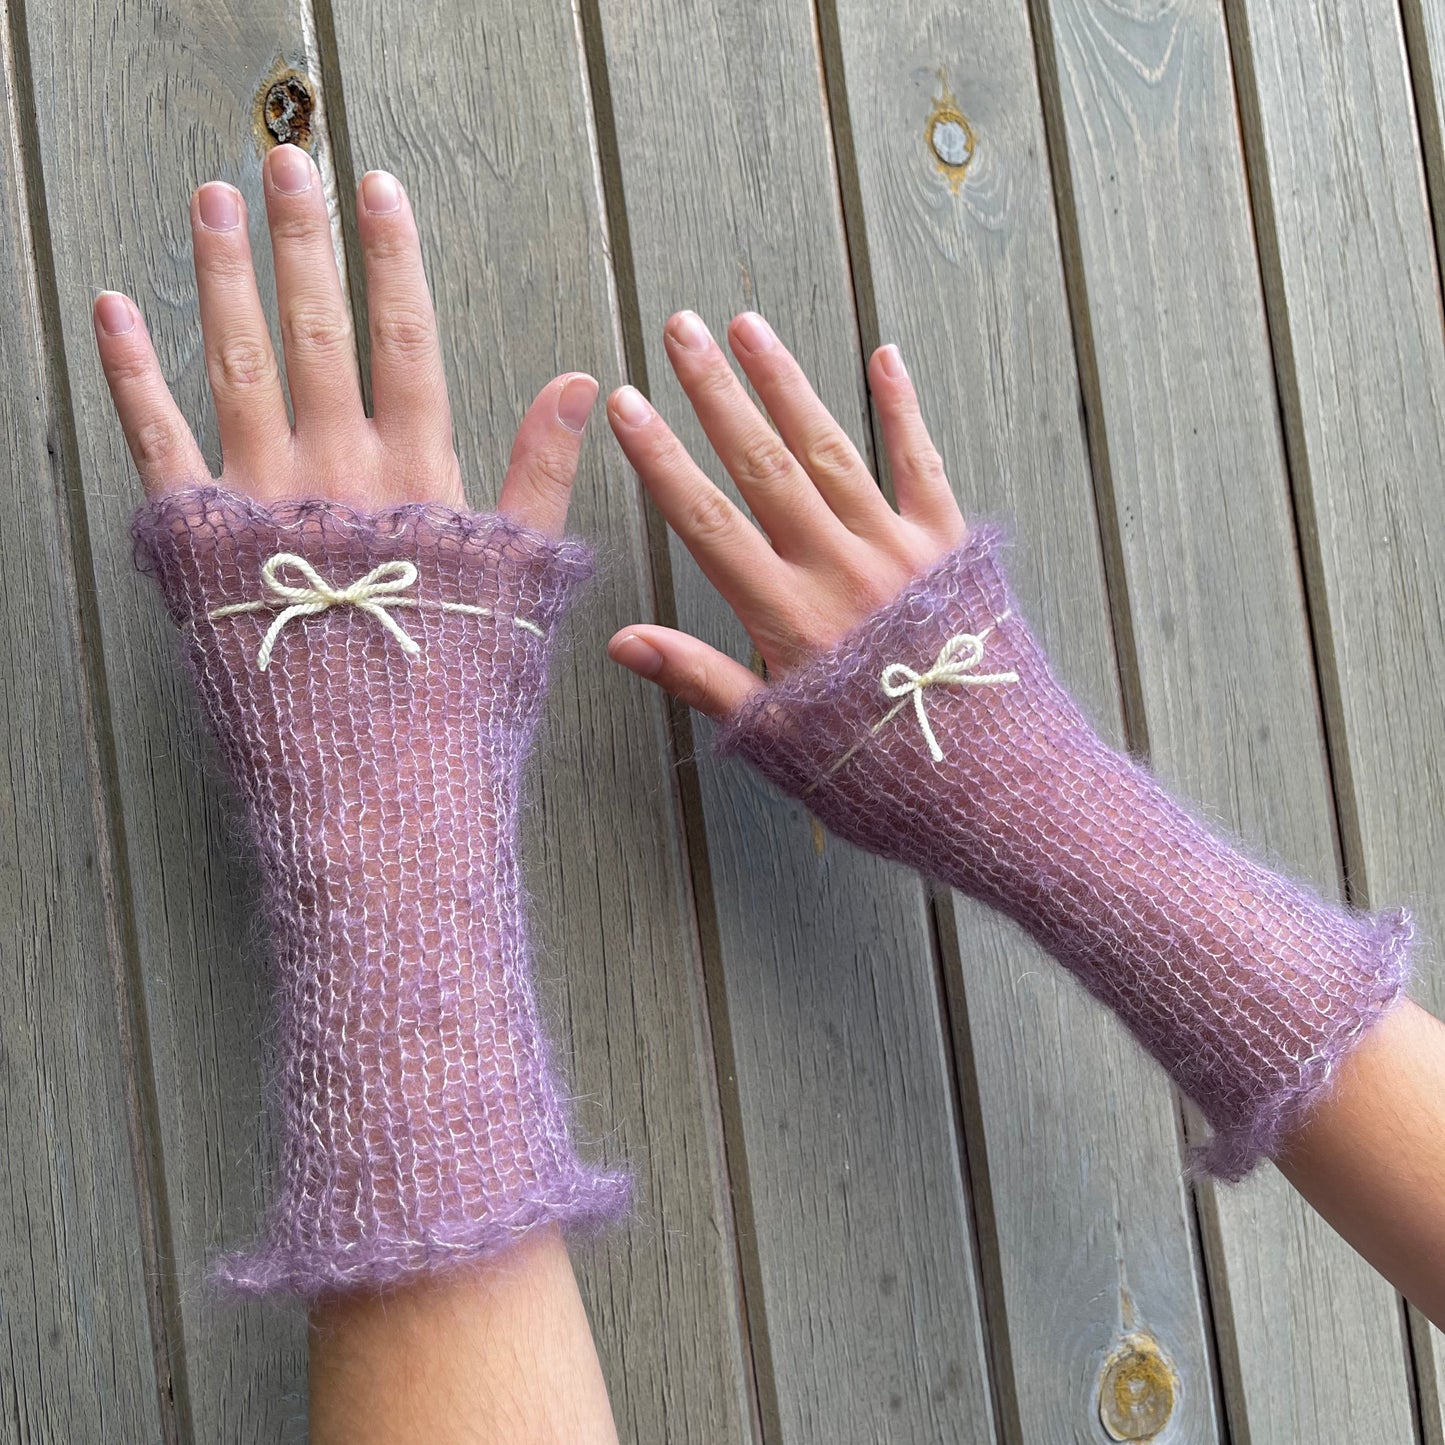 Handmade knitted mohair hand warmers in dusky purple with pastel yellow bow